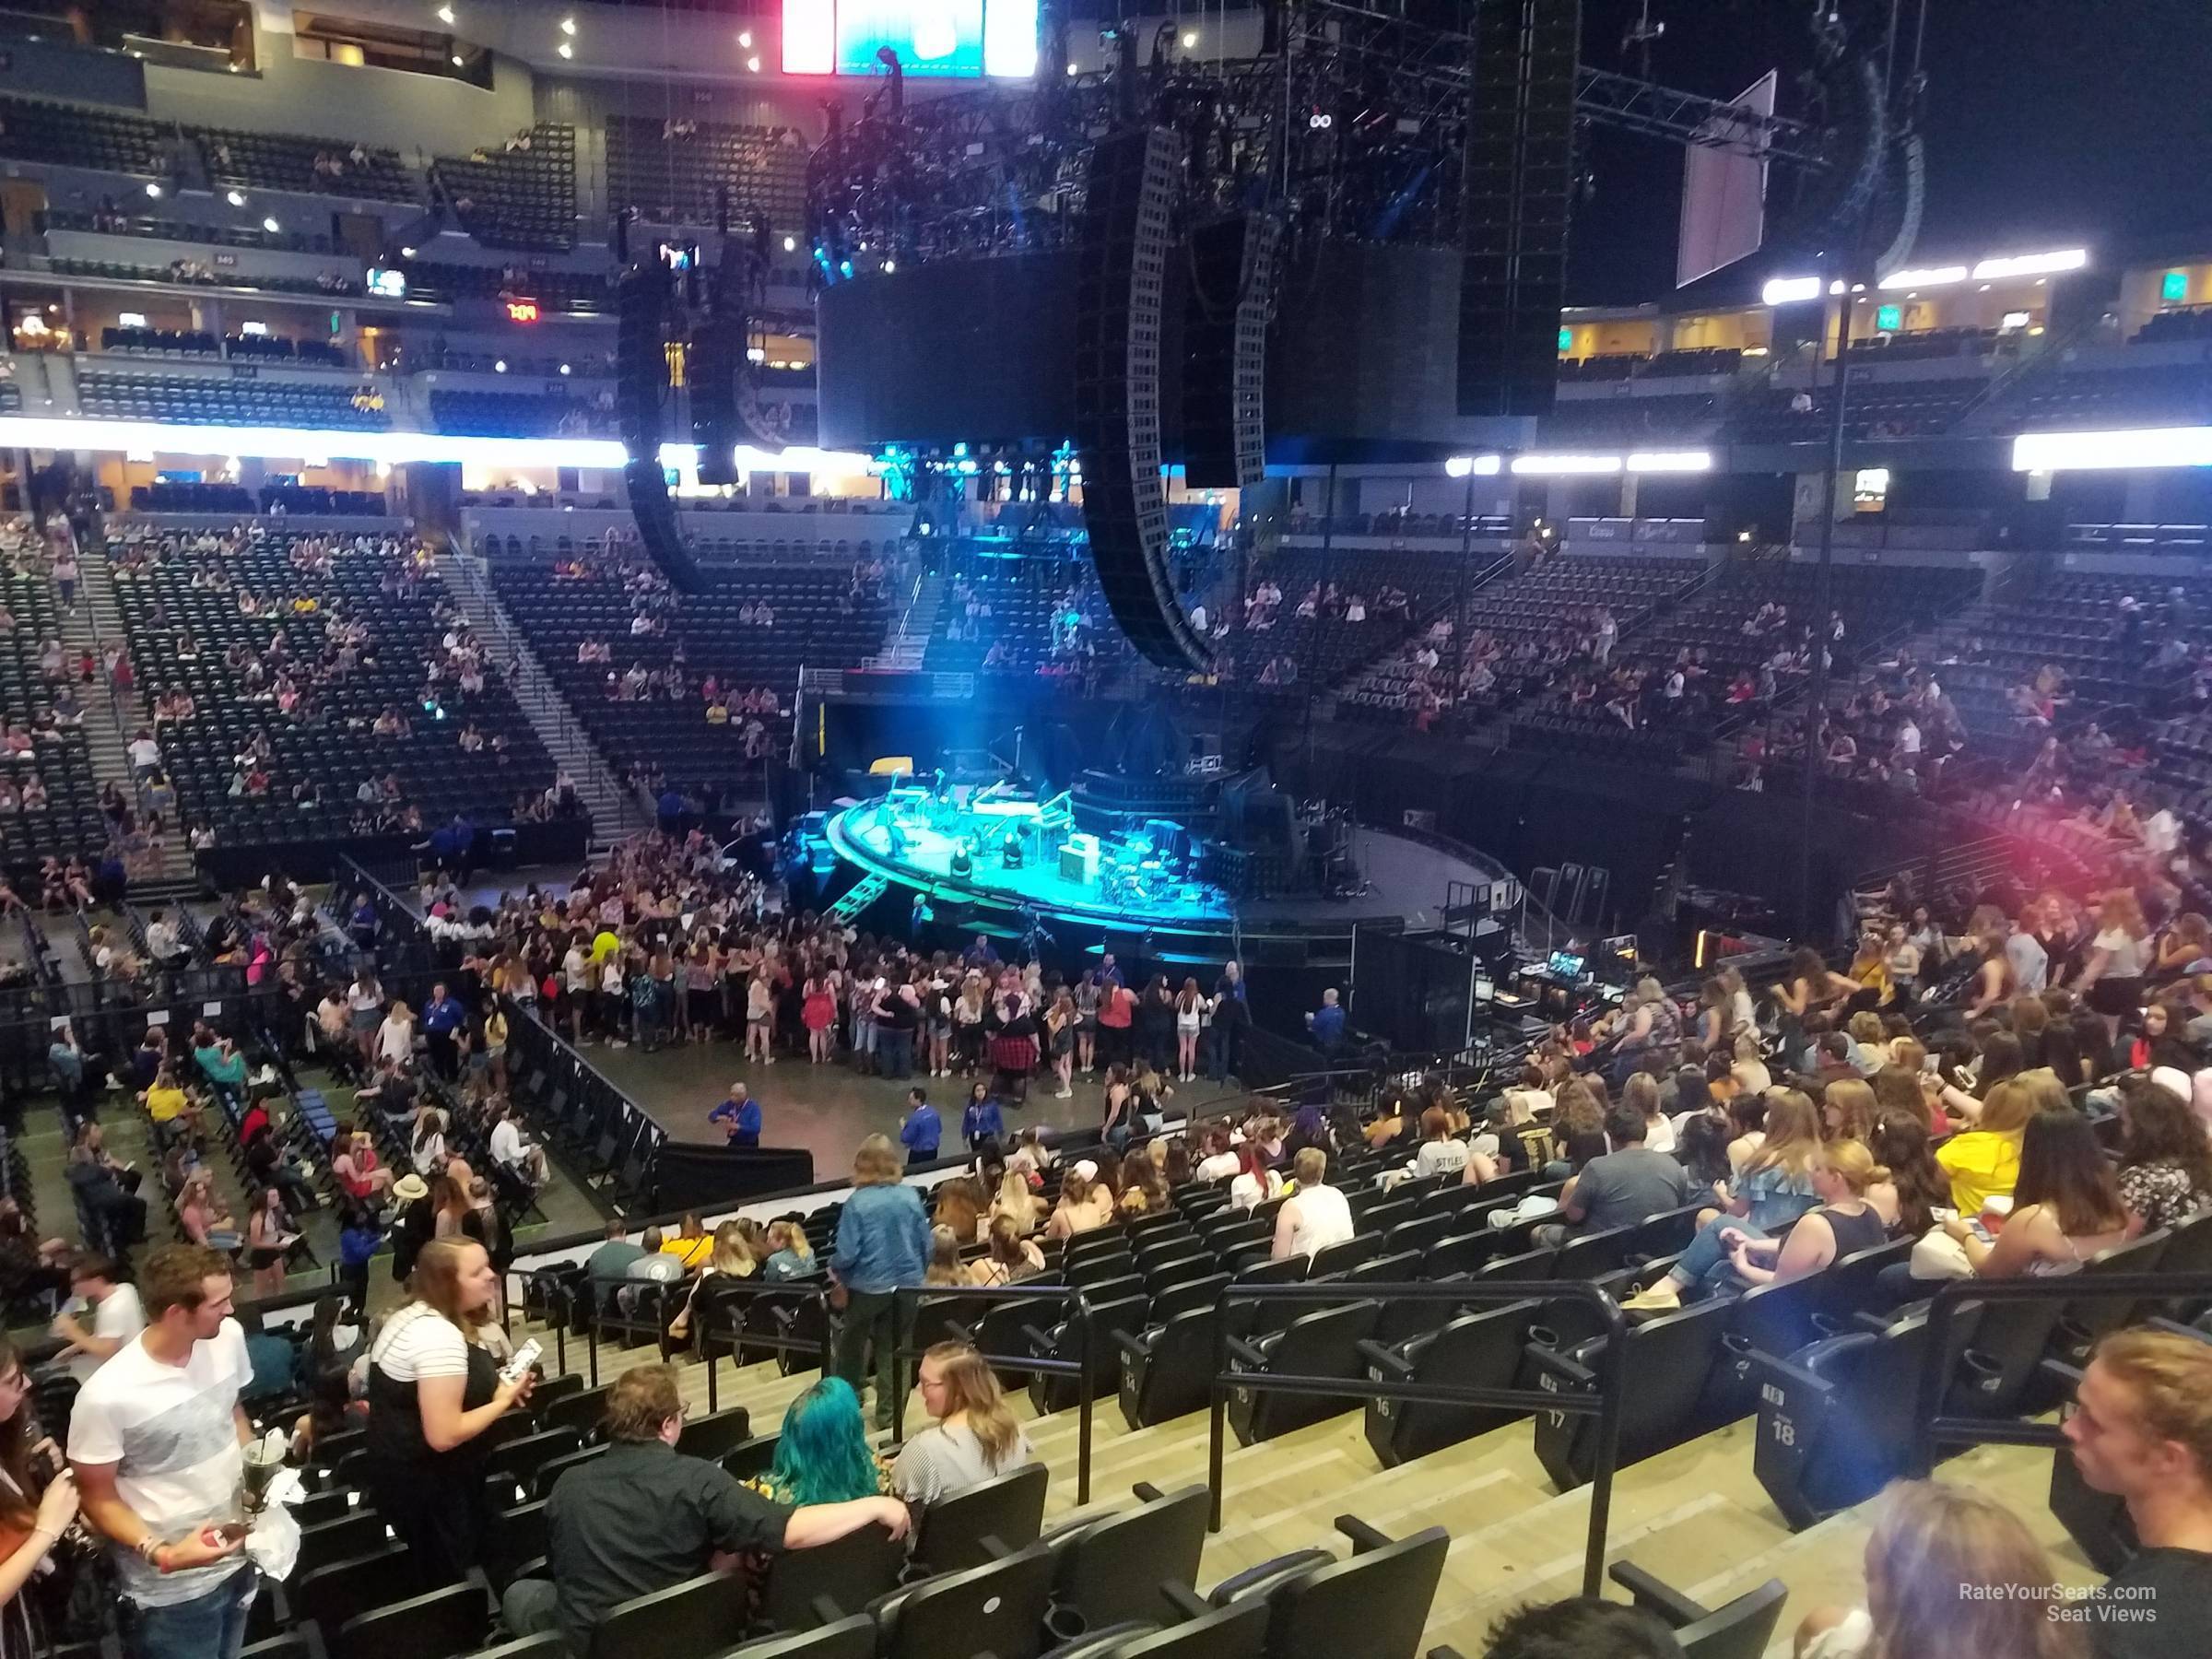 Pepsi Center Section 148 Concert Seating - RateYourSeats.com